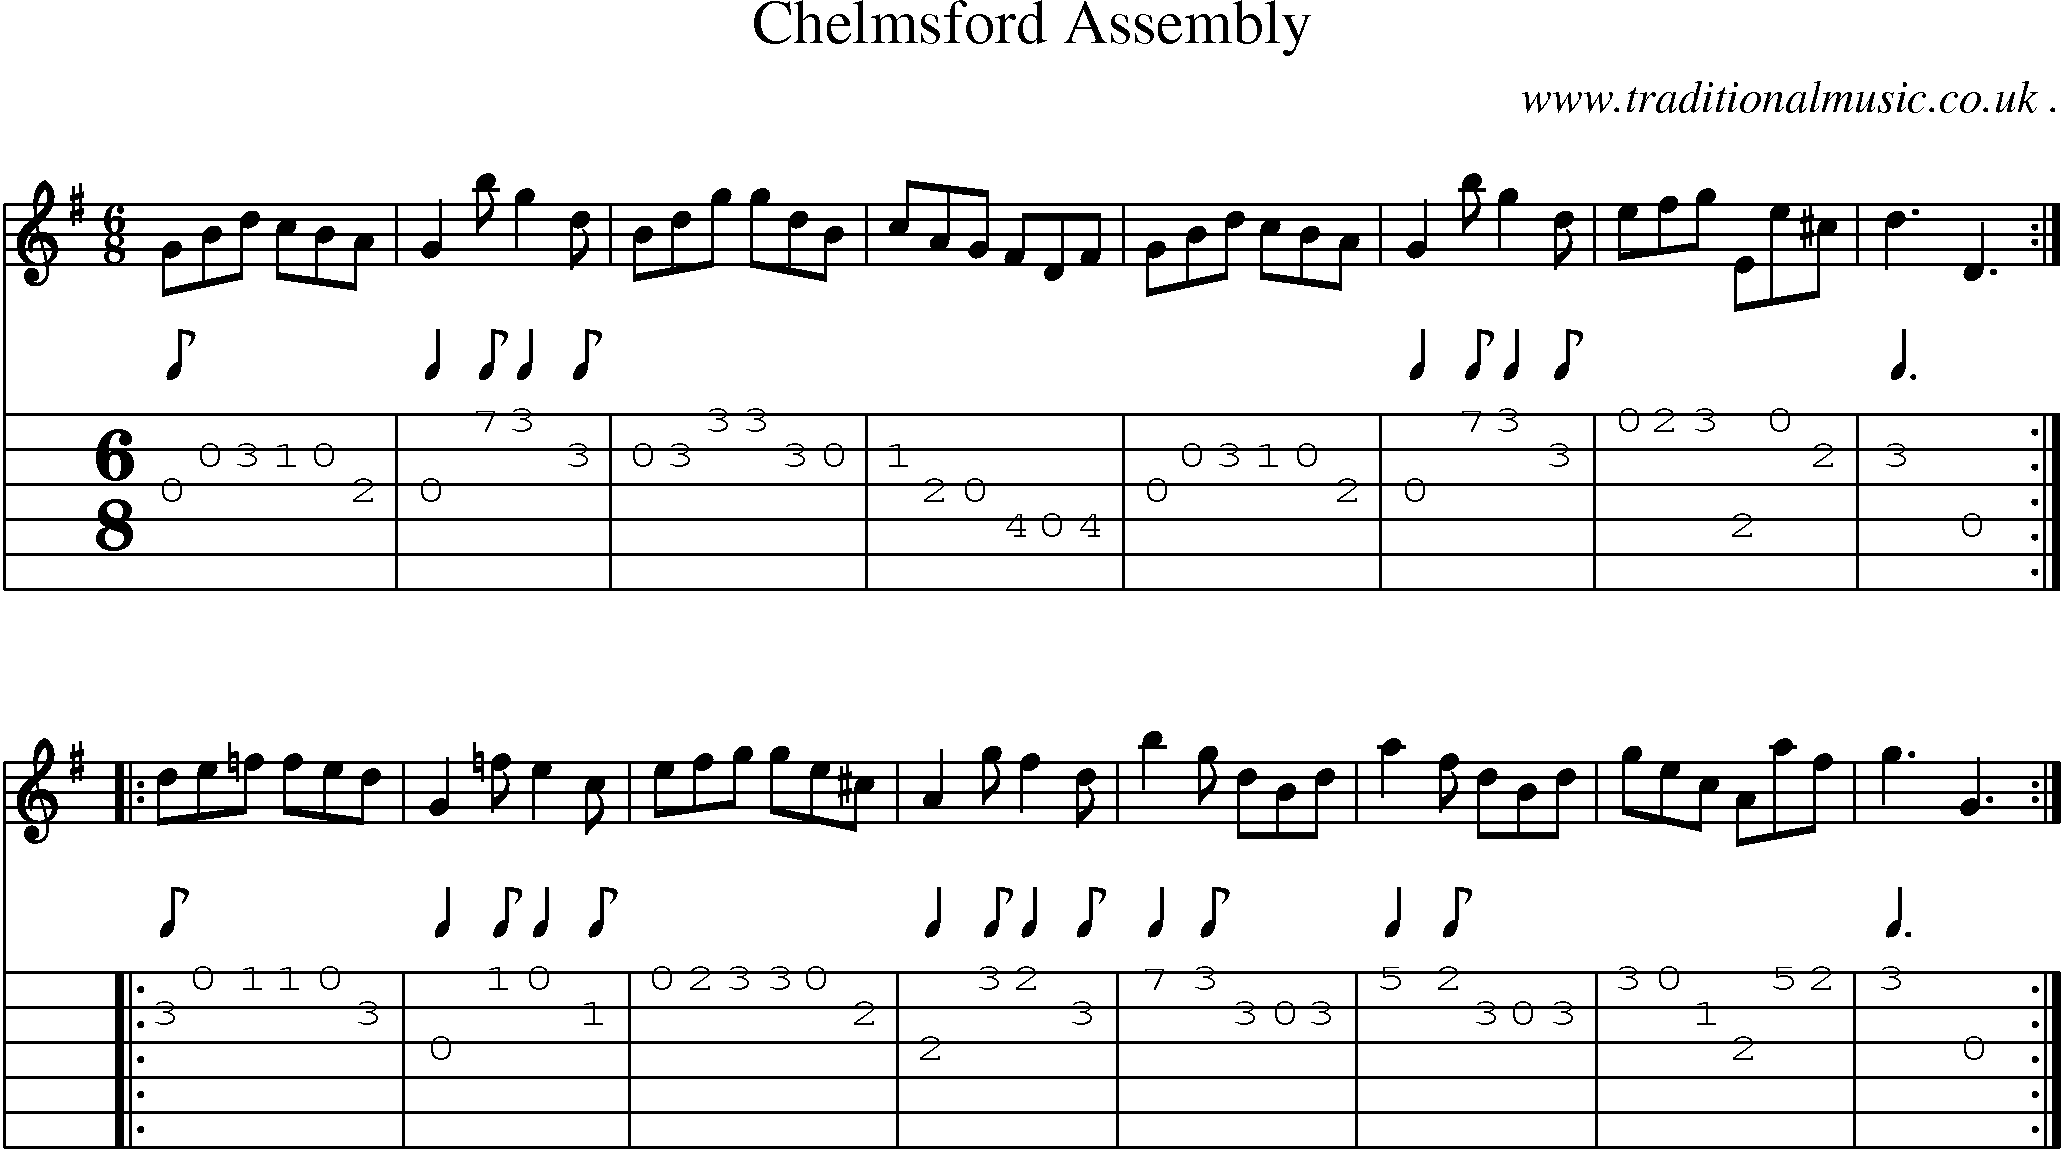 Sheet-Music and Guitar Tabs for Chelmsford Assembly